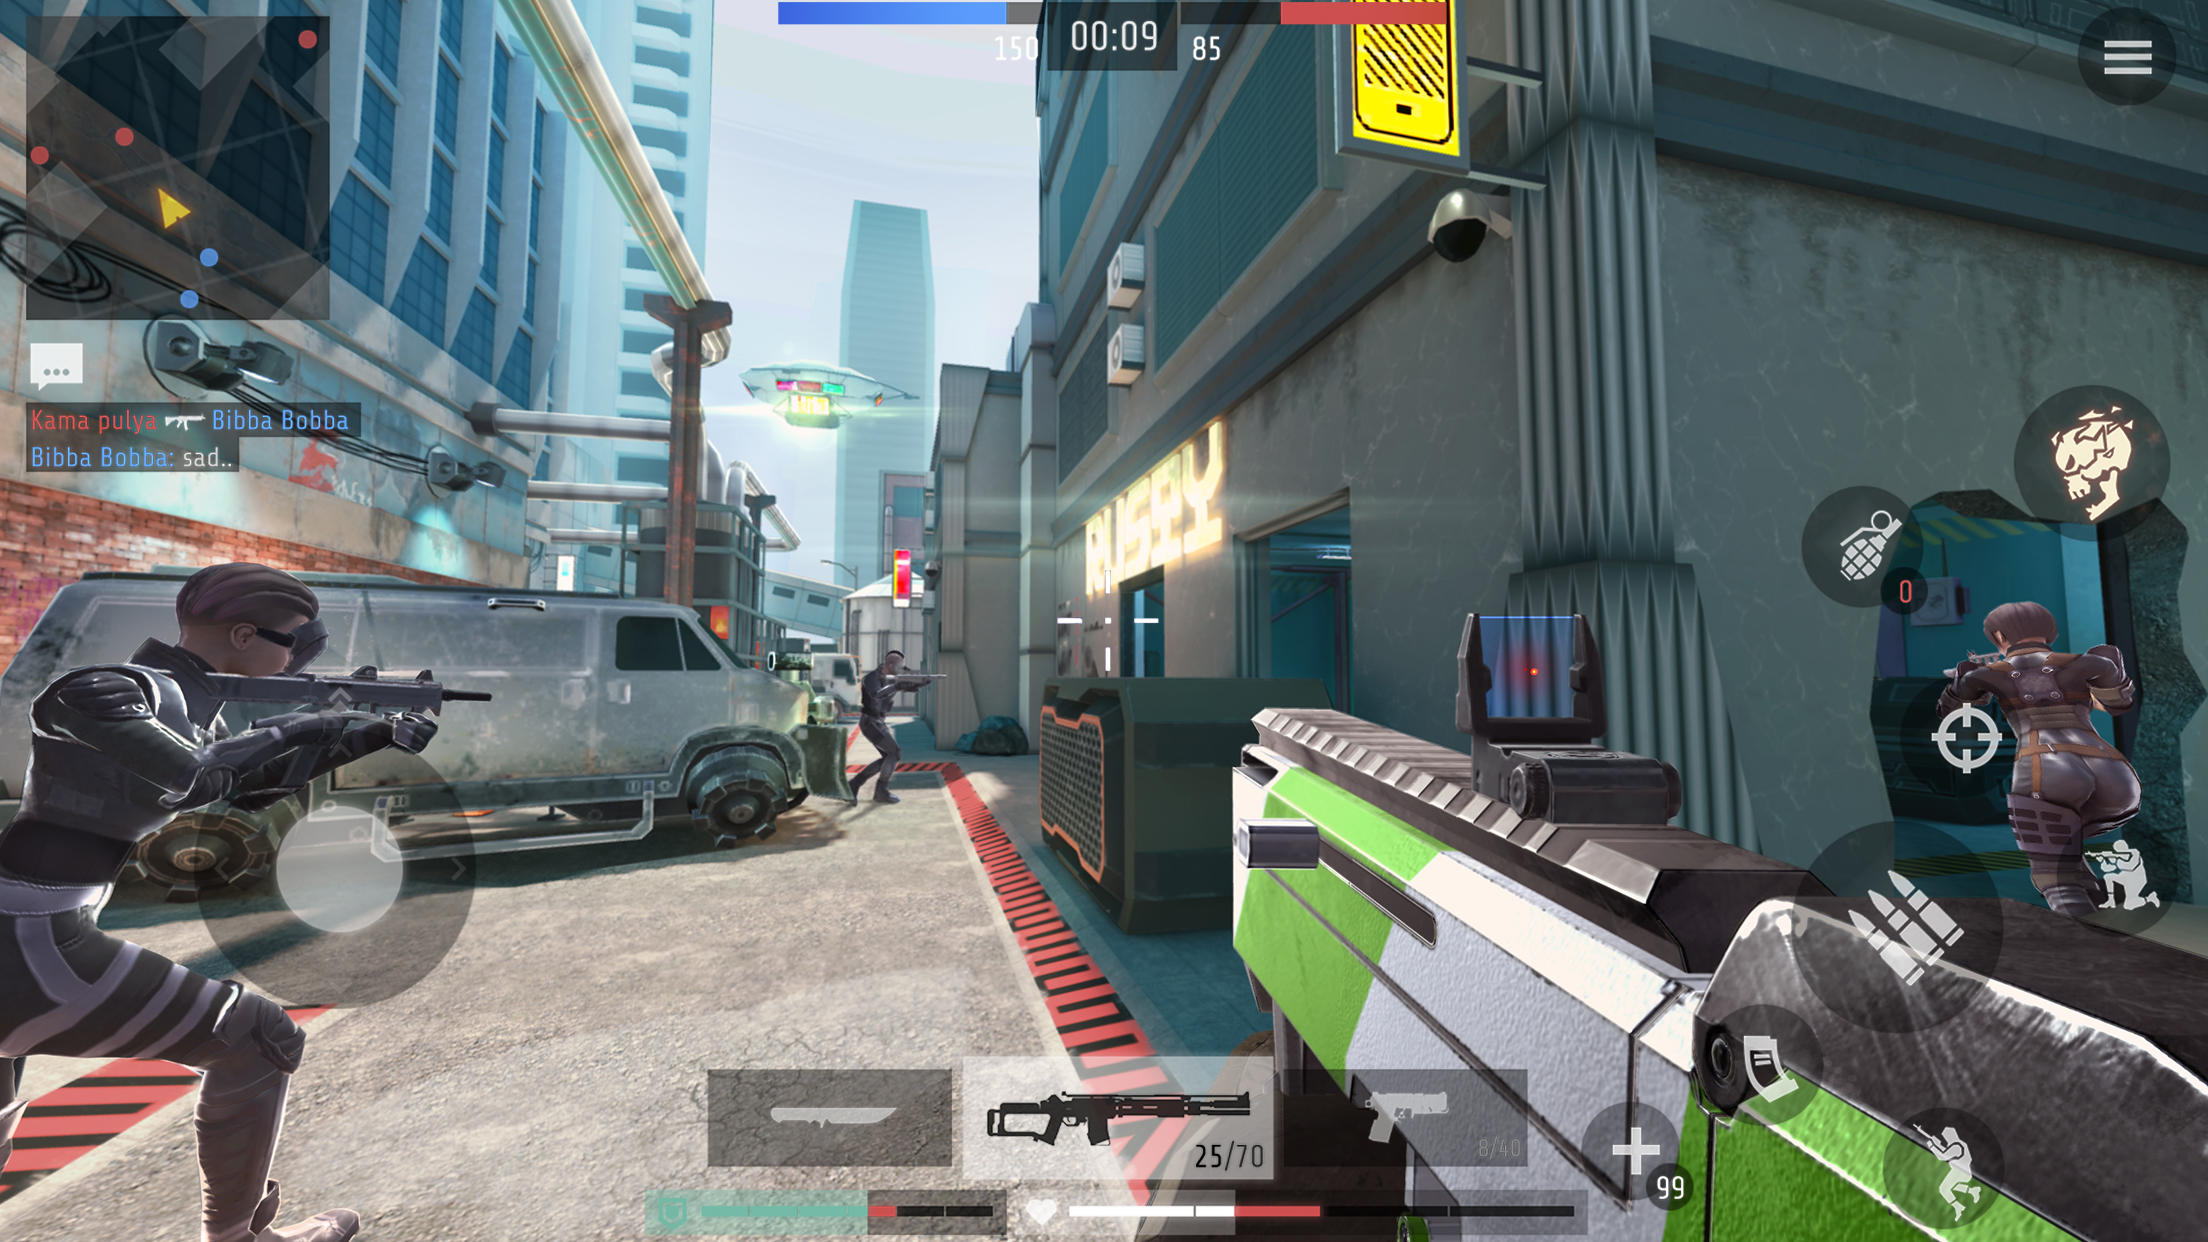 What are some best multiplayer shooting games for Android to play